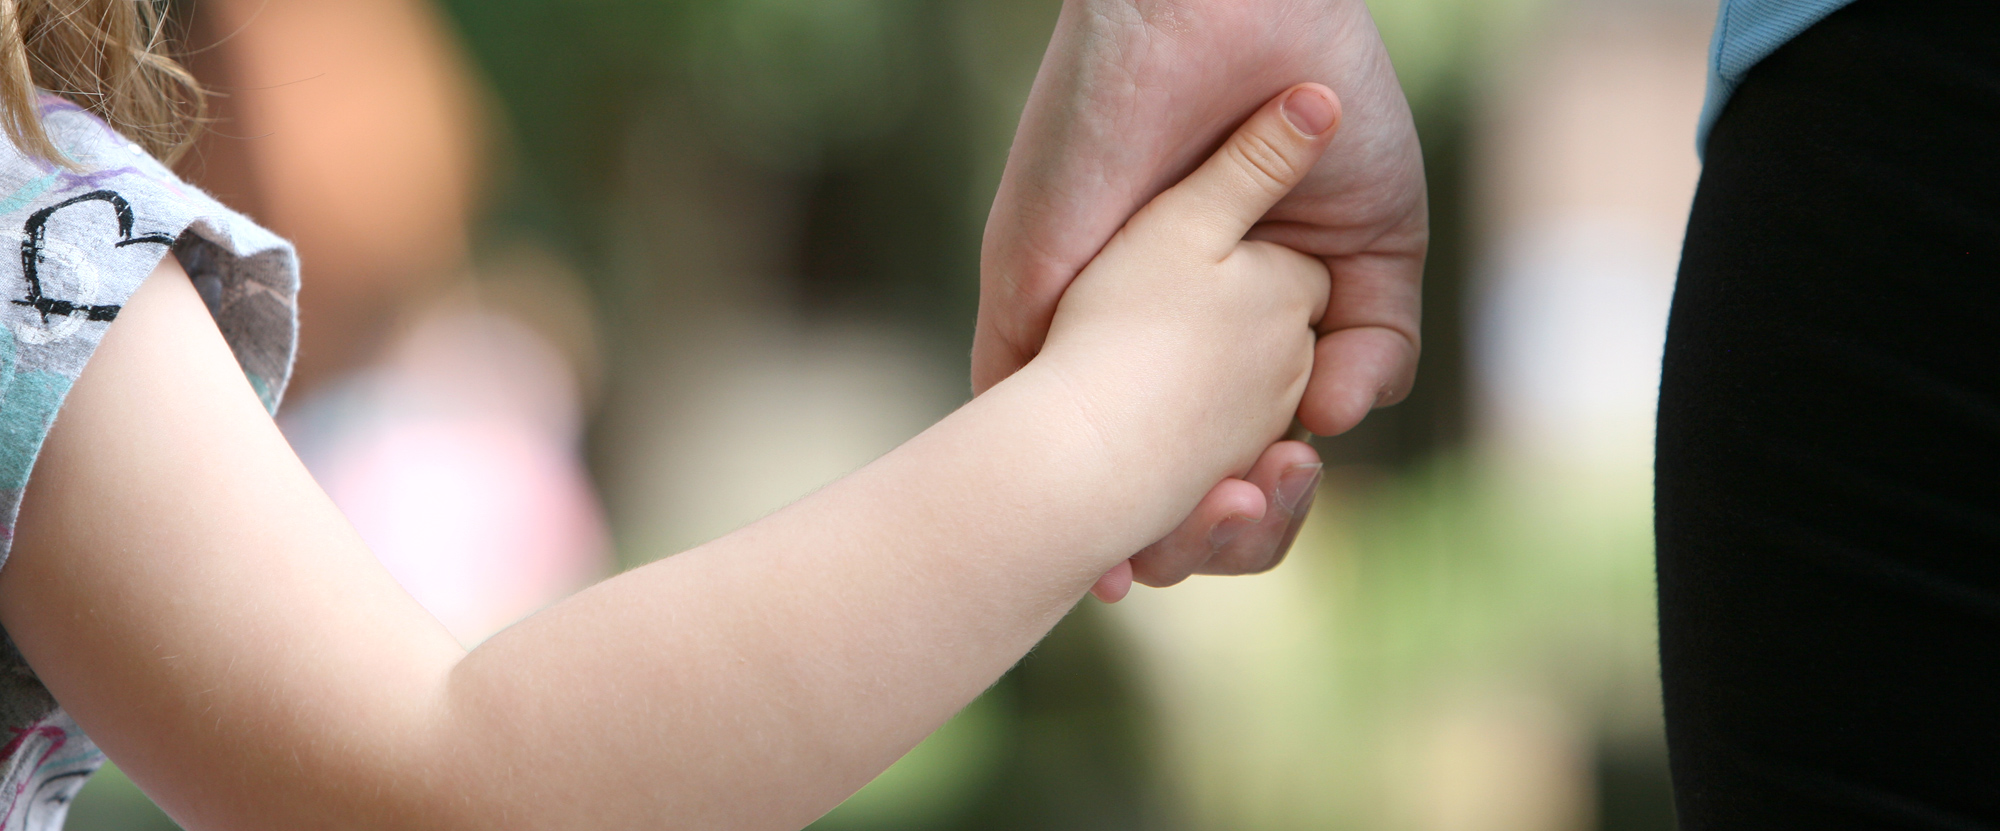 A close up of a young child holding the hand of an adult.